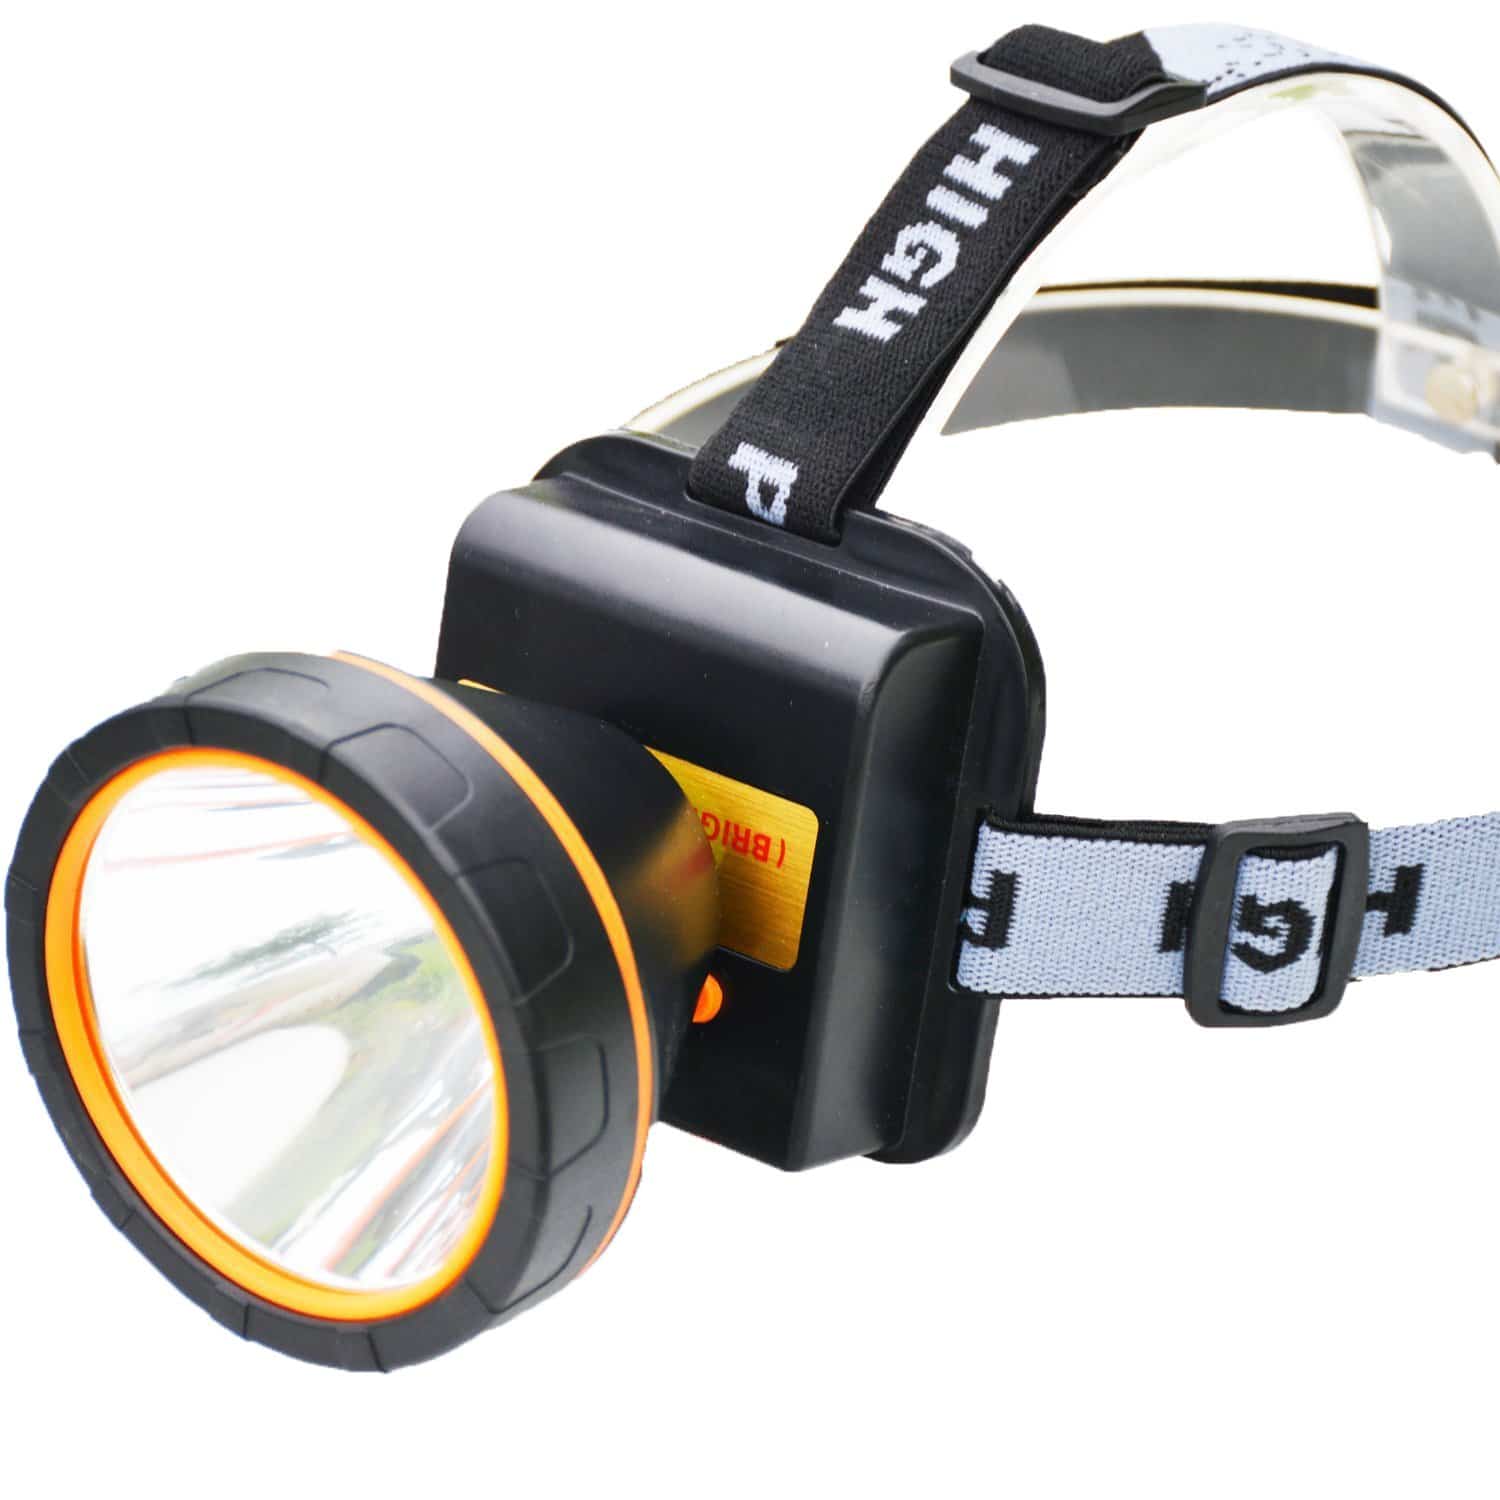 olidear LED Headlamp Torch Outdoor Rechargeable Headlight